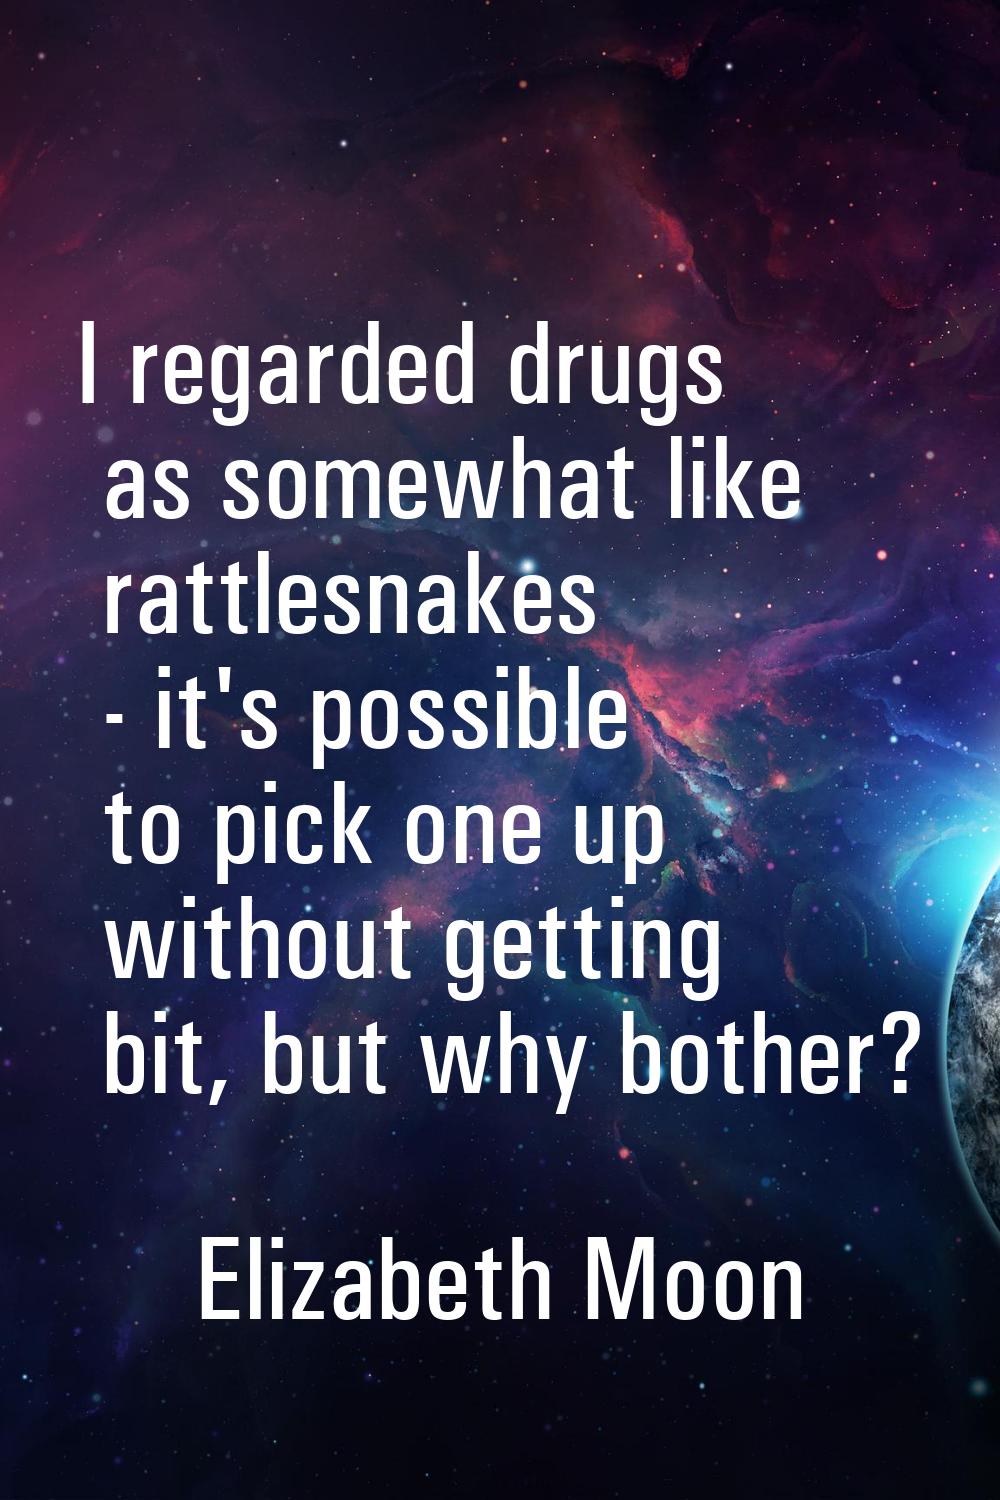 I regarded drugs as somewhat like rattlesnakes - it's possible to pick one up without getting bit, 